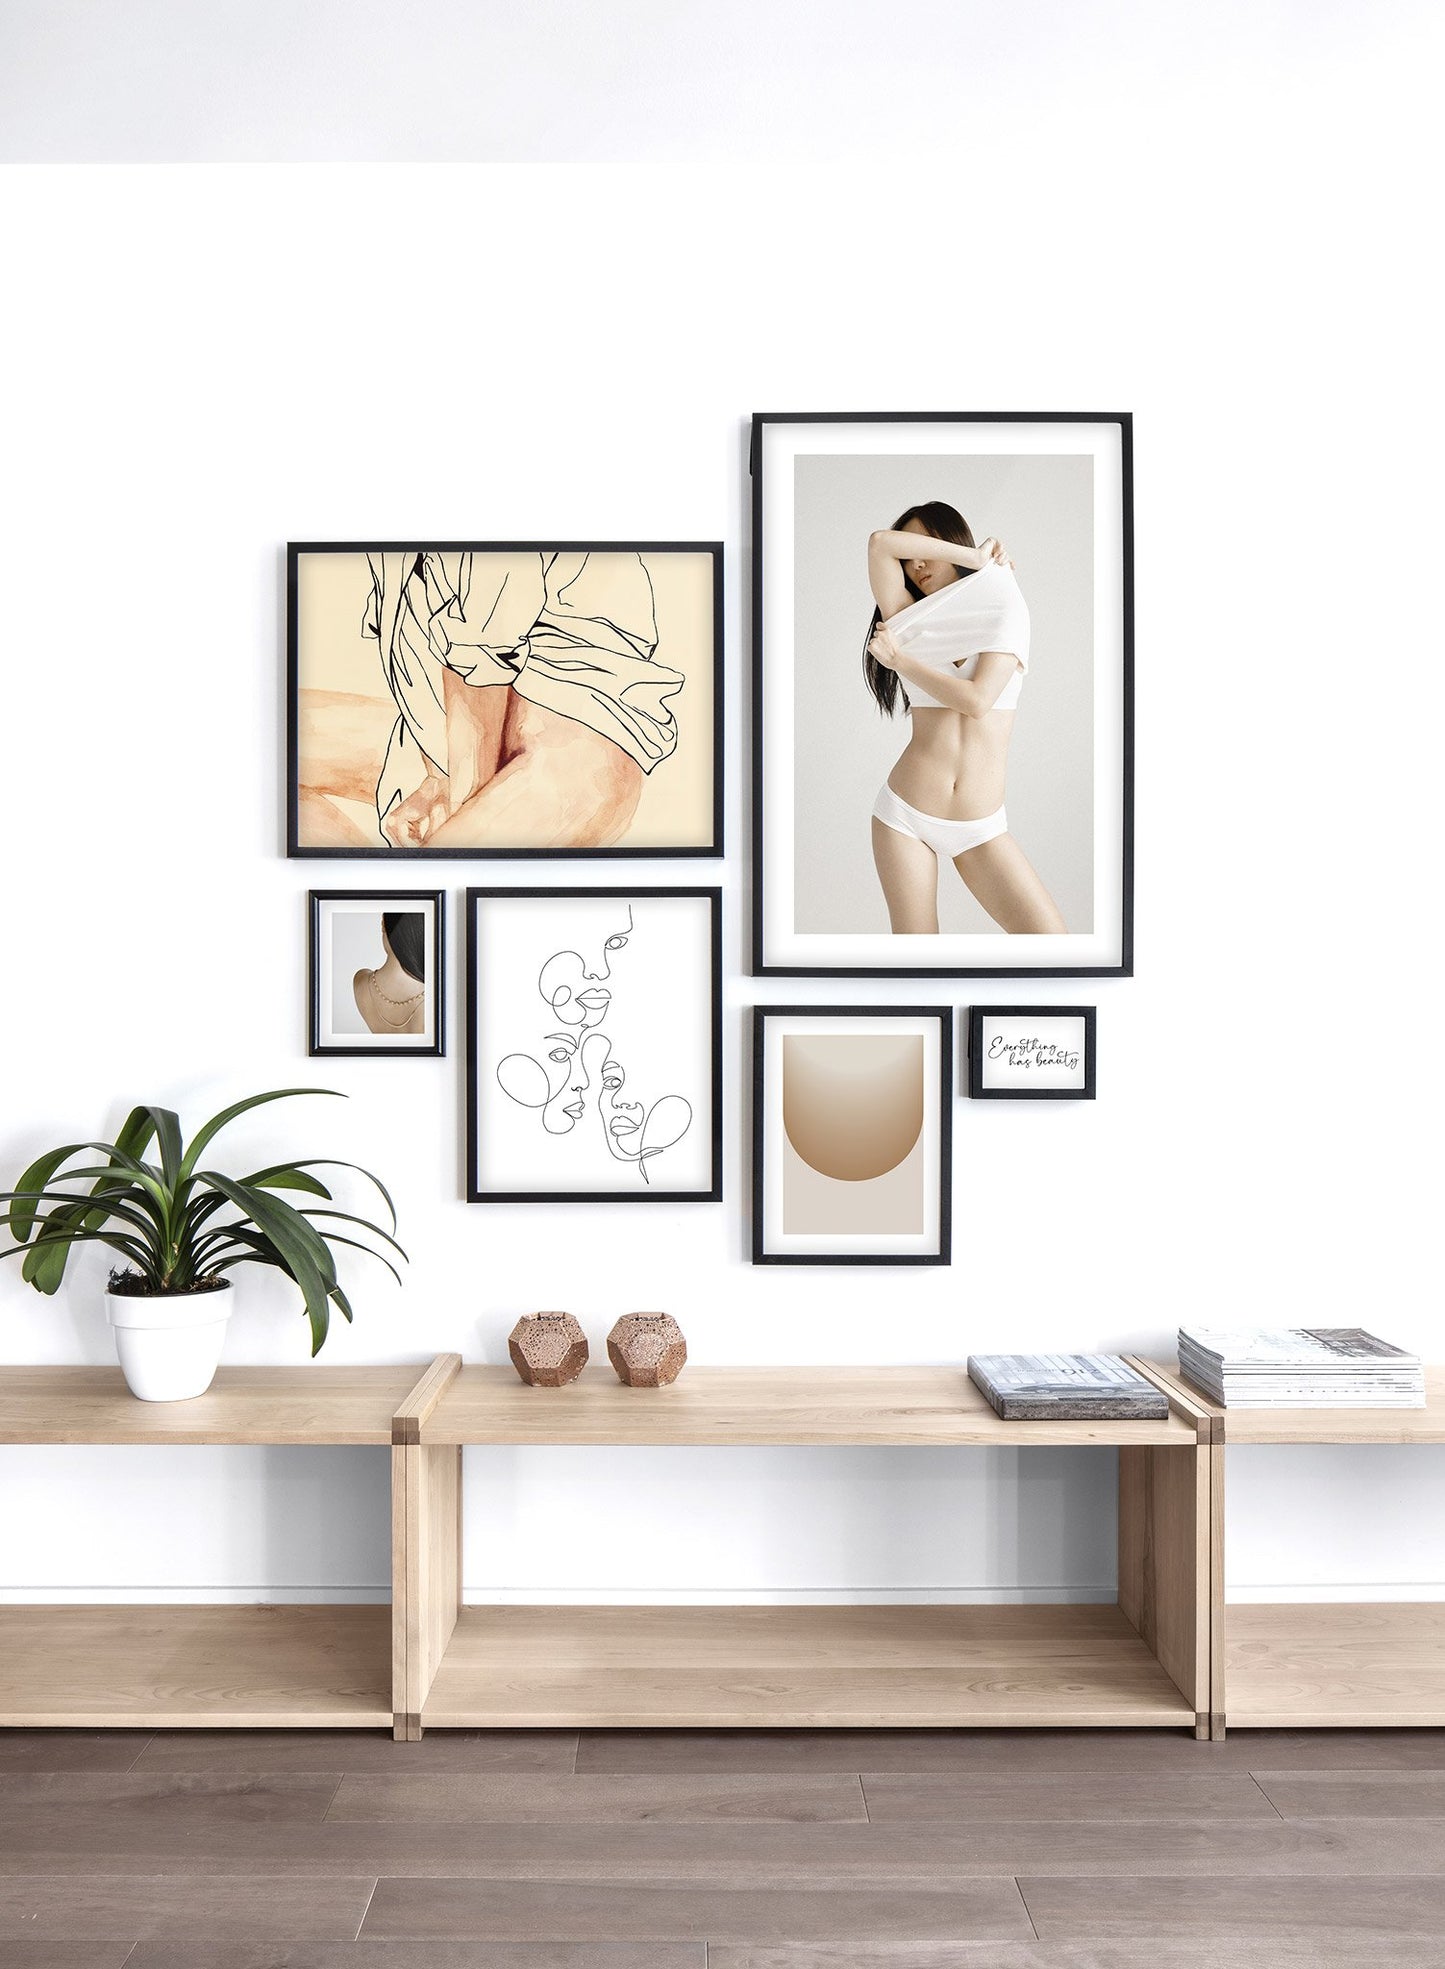 Fashion photography poster by Opposite Wall with woman shedding layers of clothing - Lifestyle Gallery - Living Room